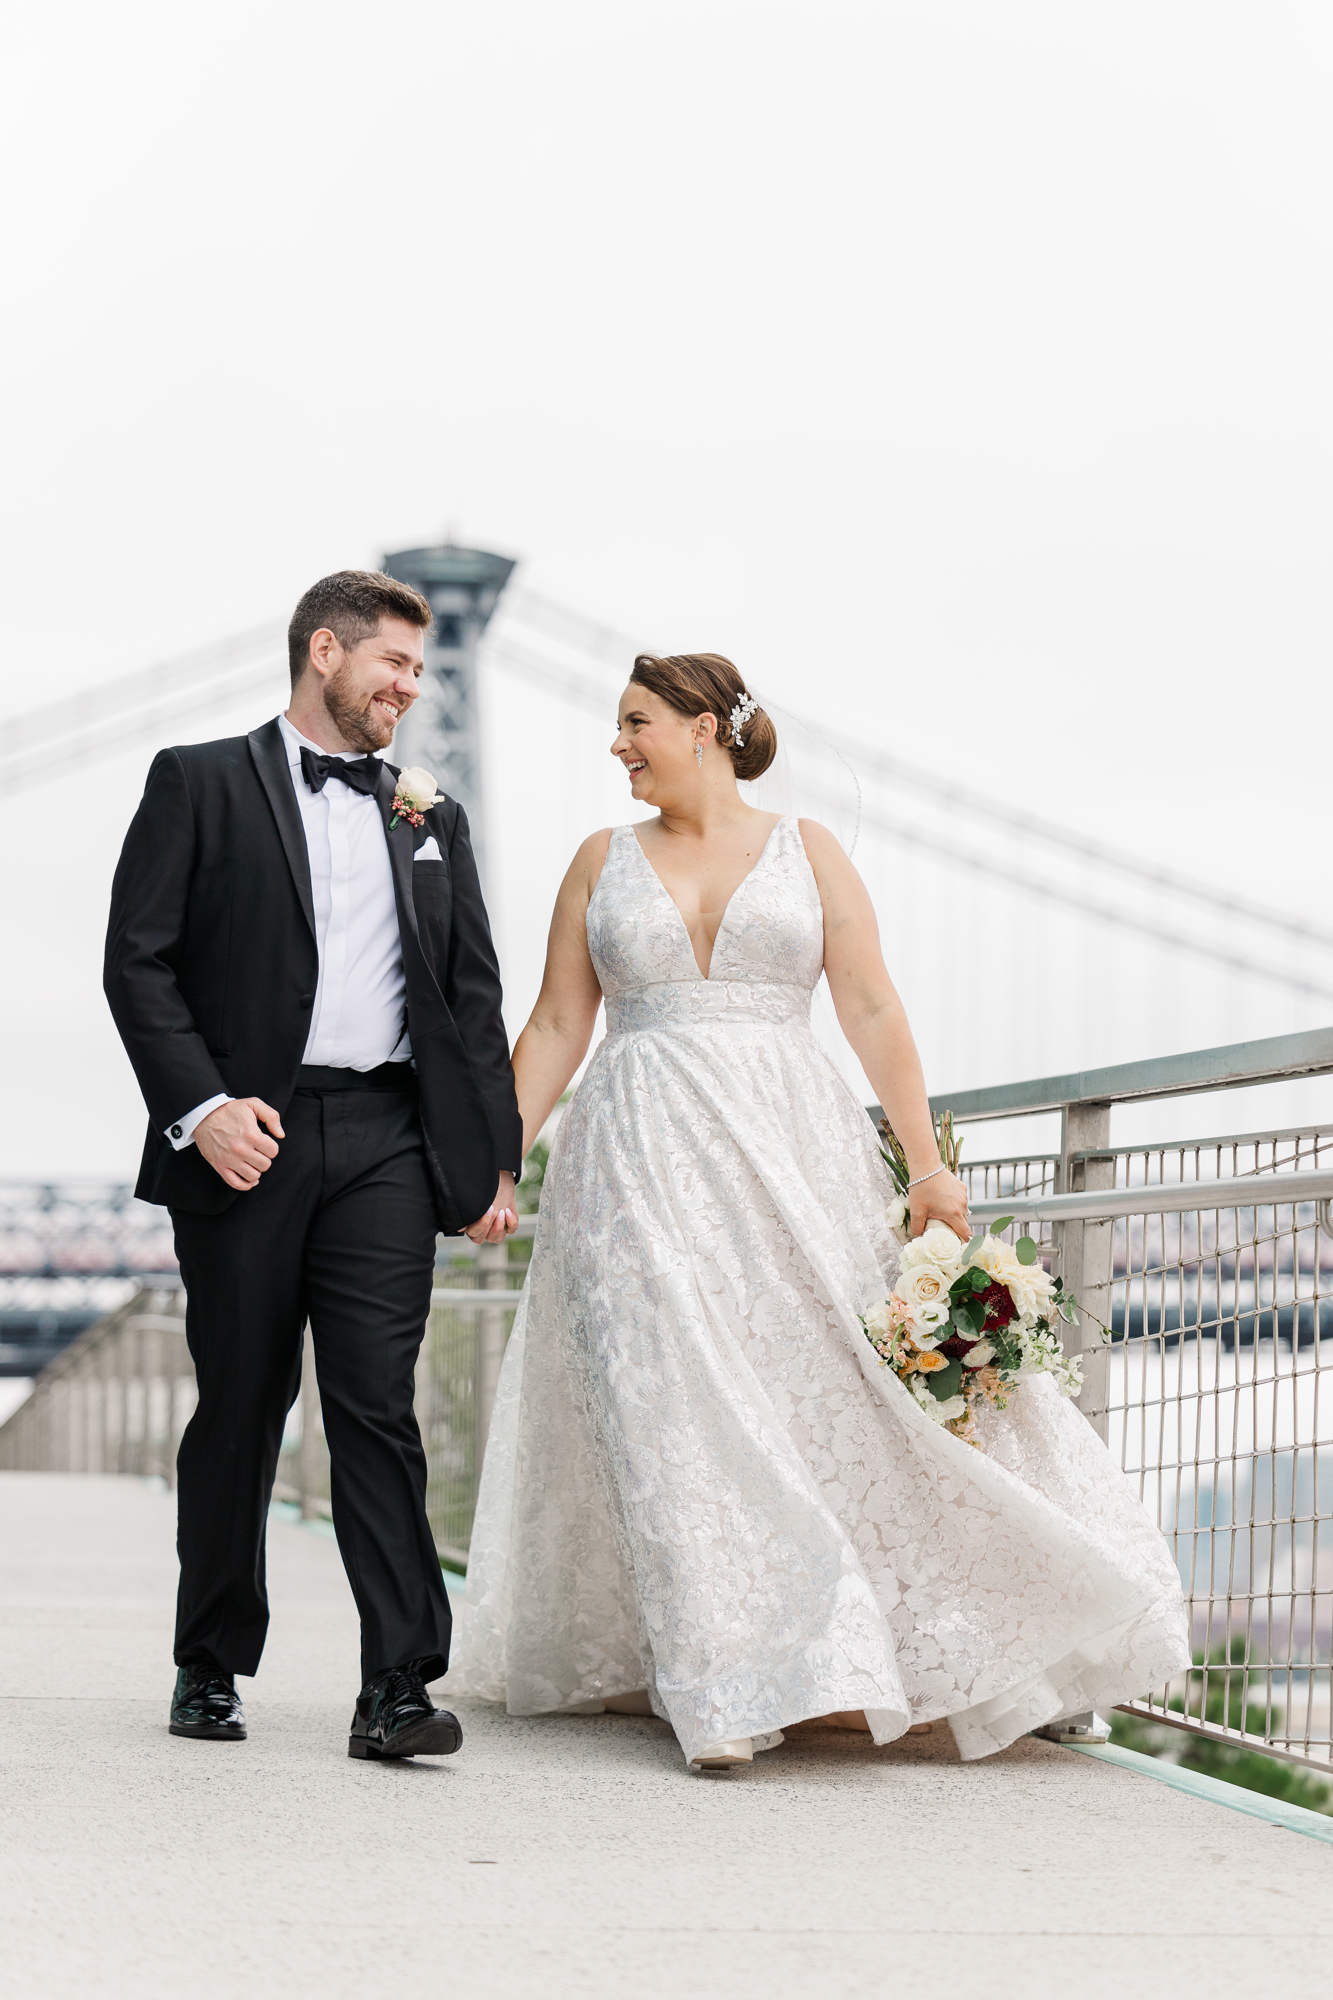 The Cost of NYC Photographers for a Beautiful Elopement